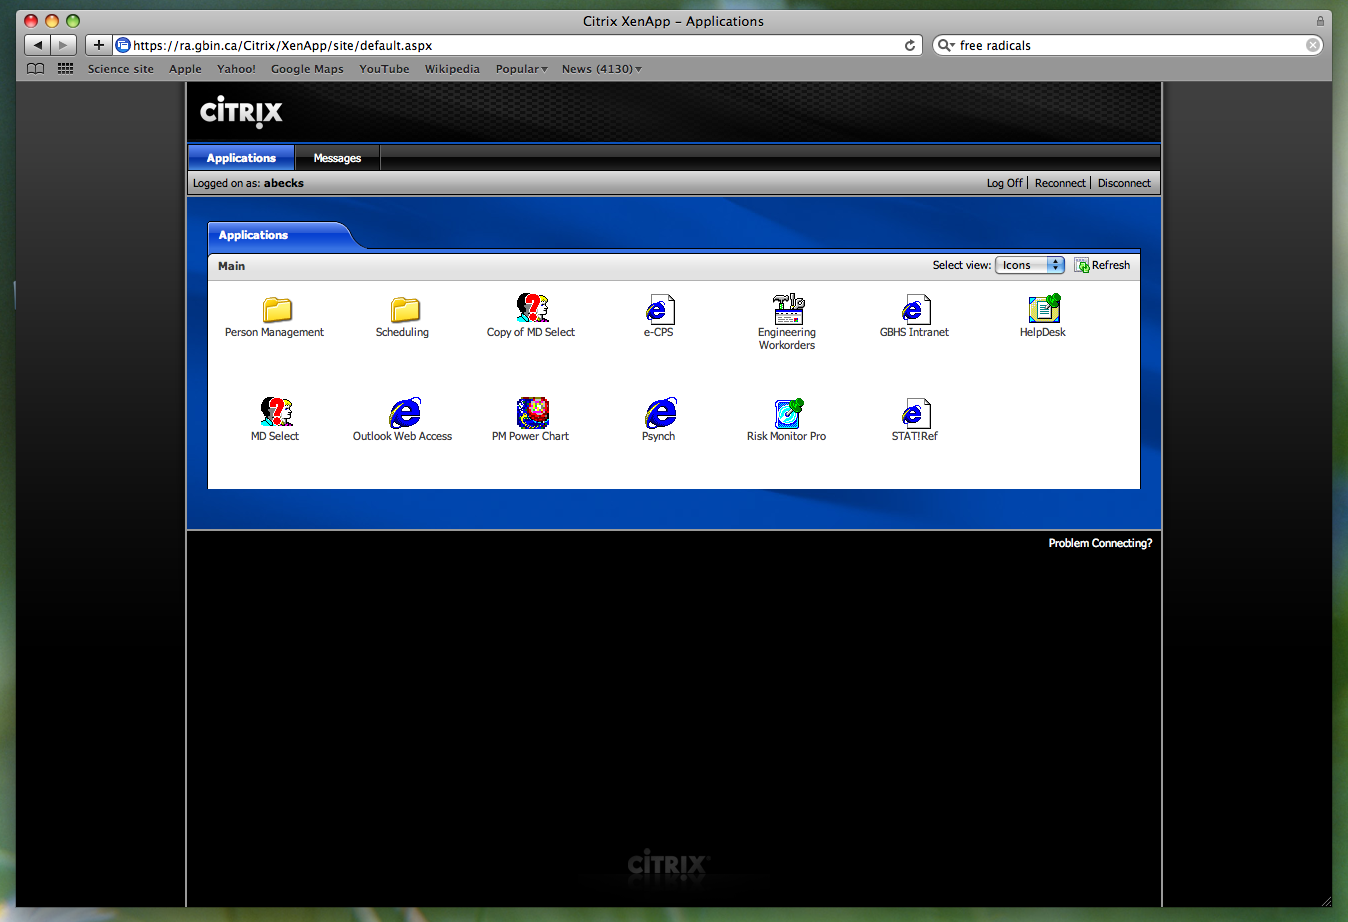 apple mail download for windows xp